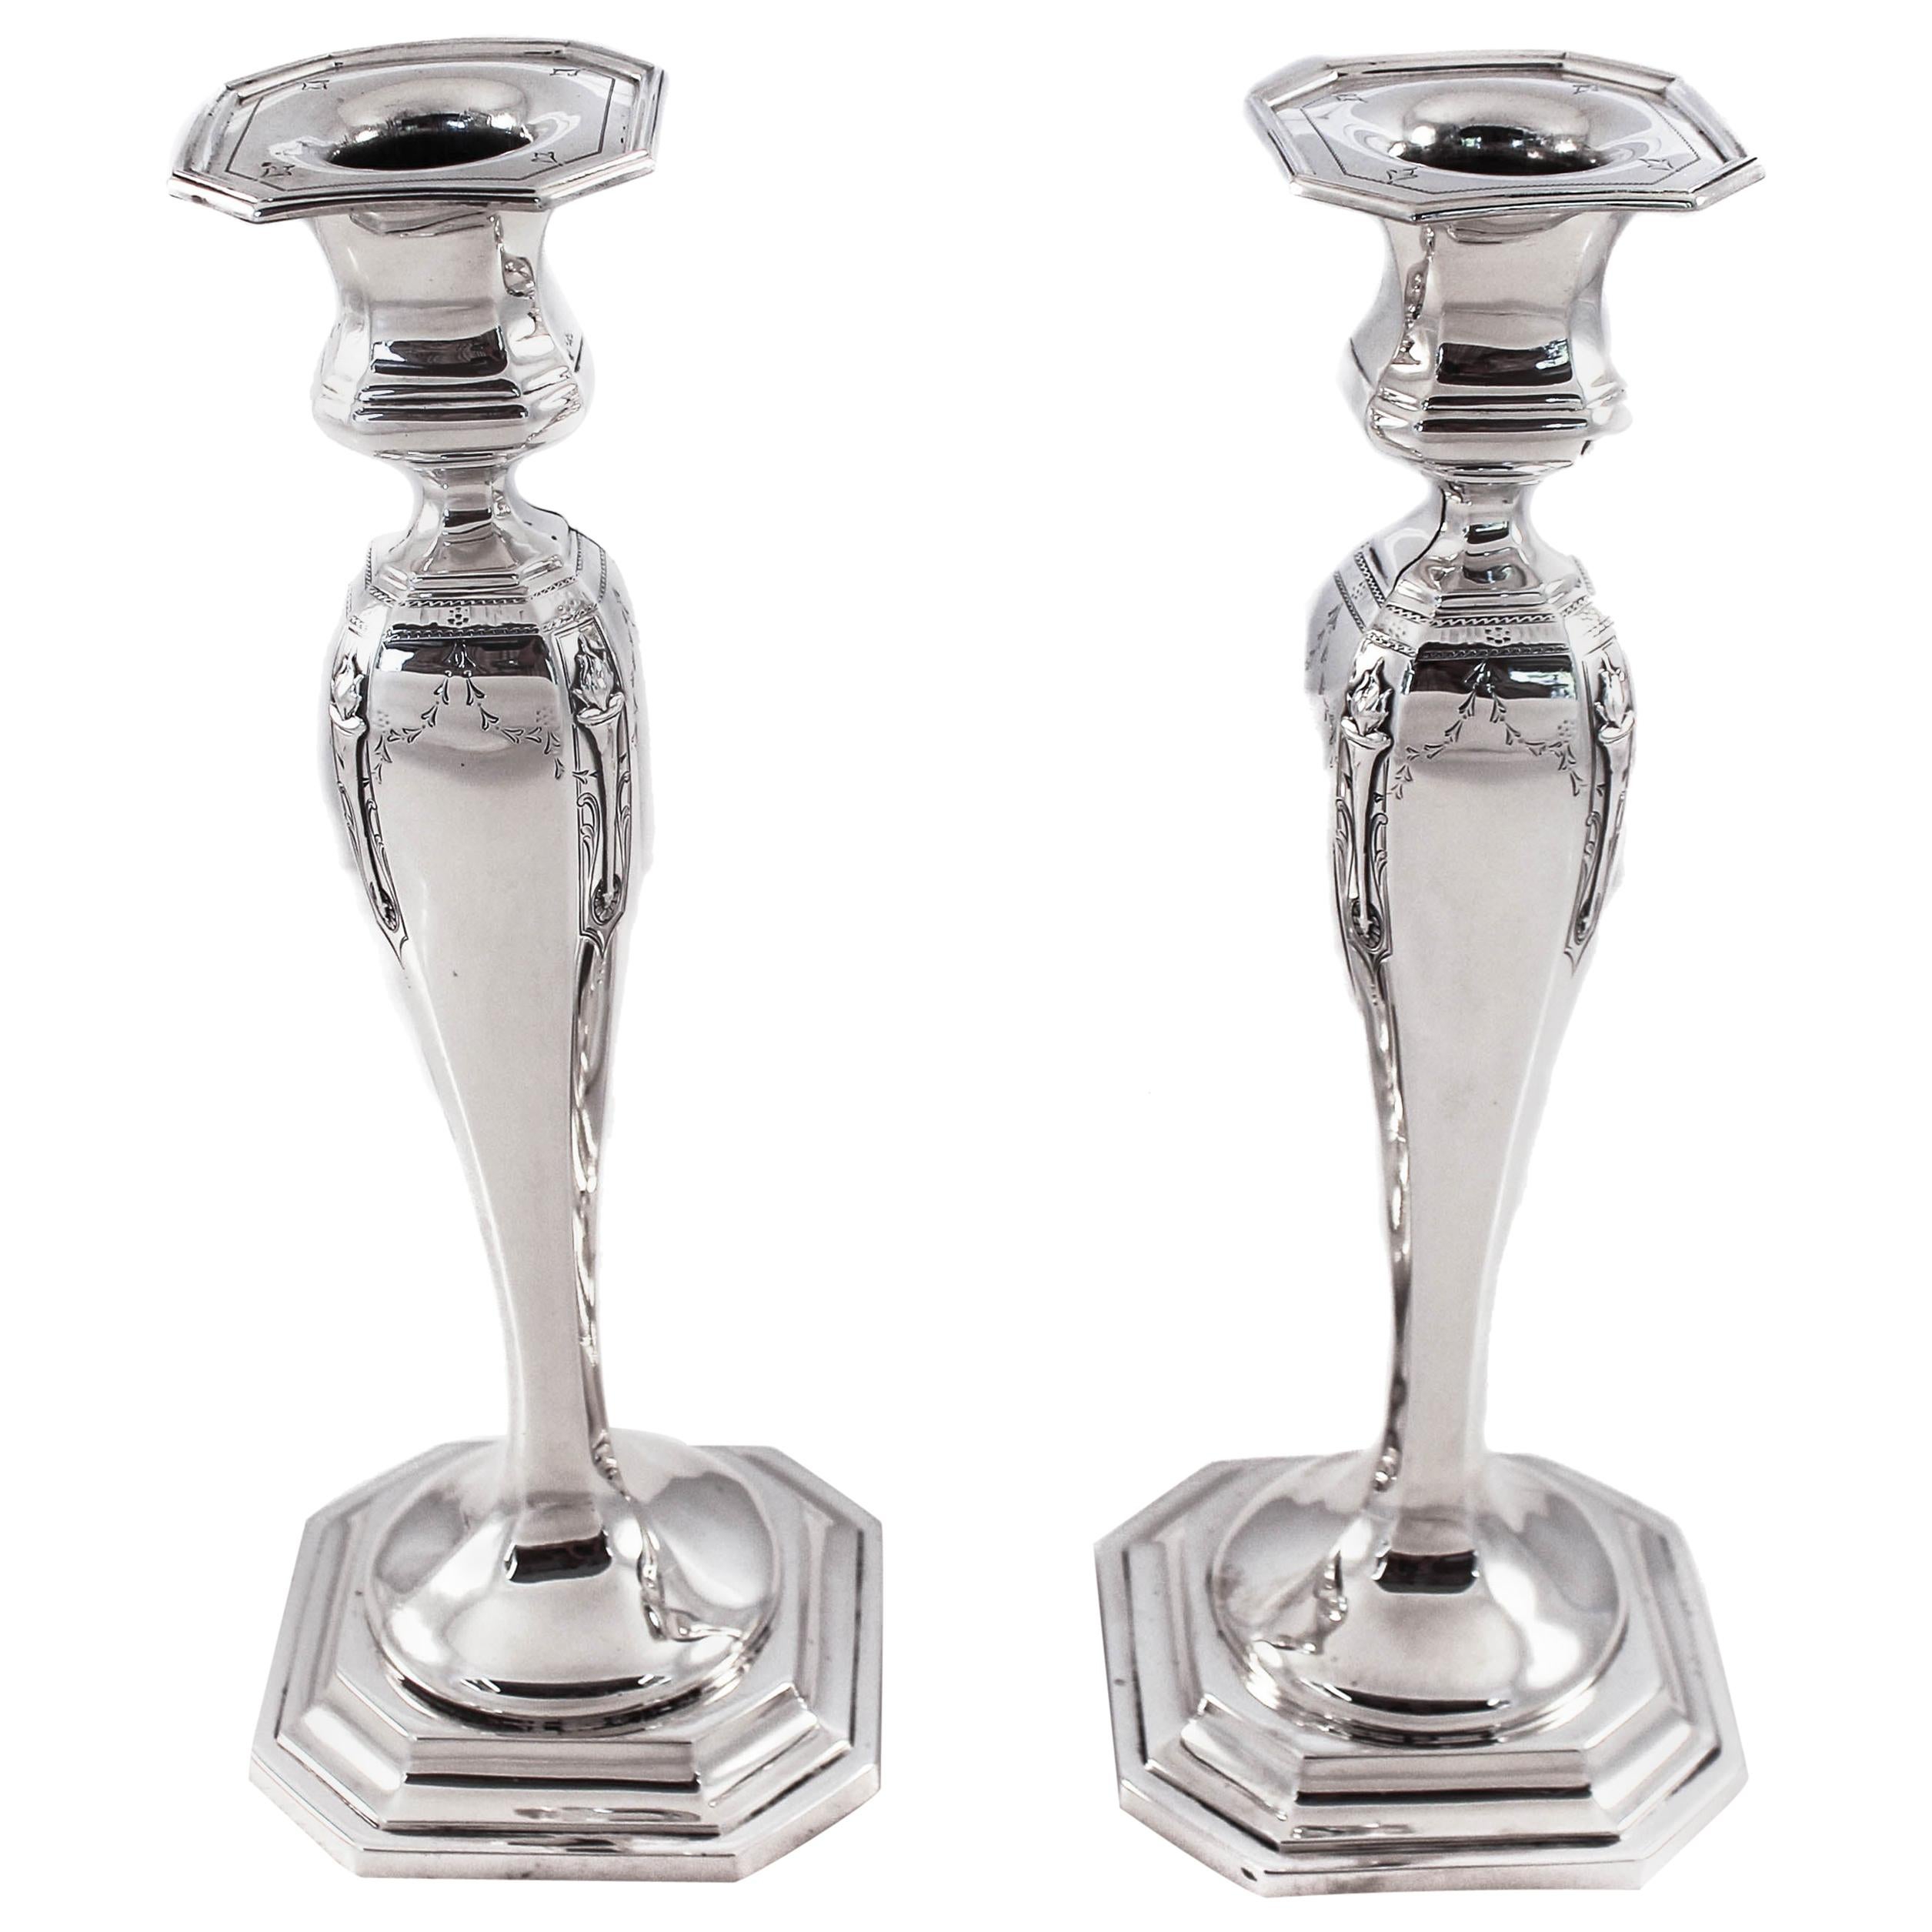 Sterling Candlesticks by Frank Whiting